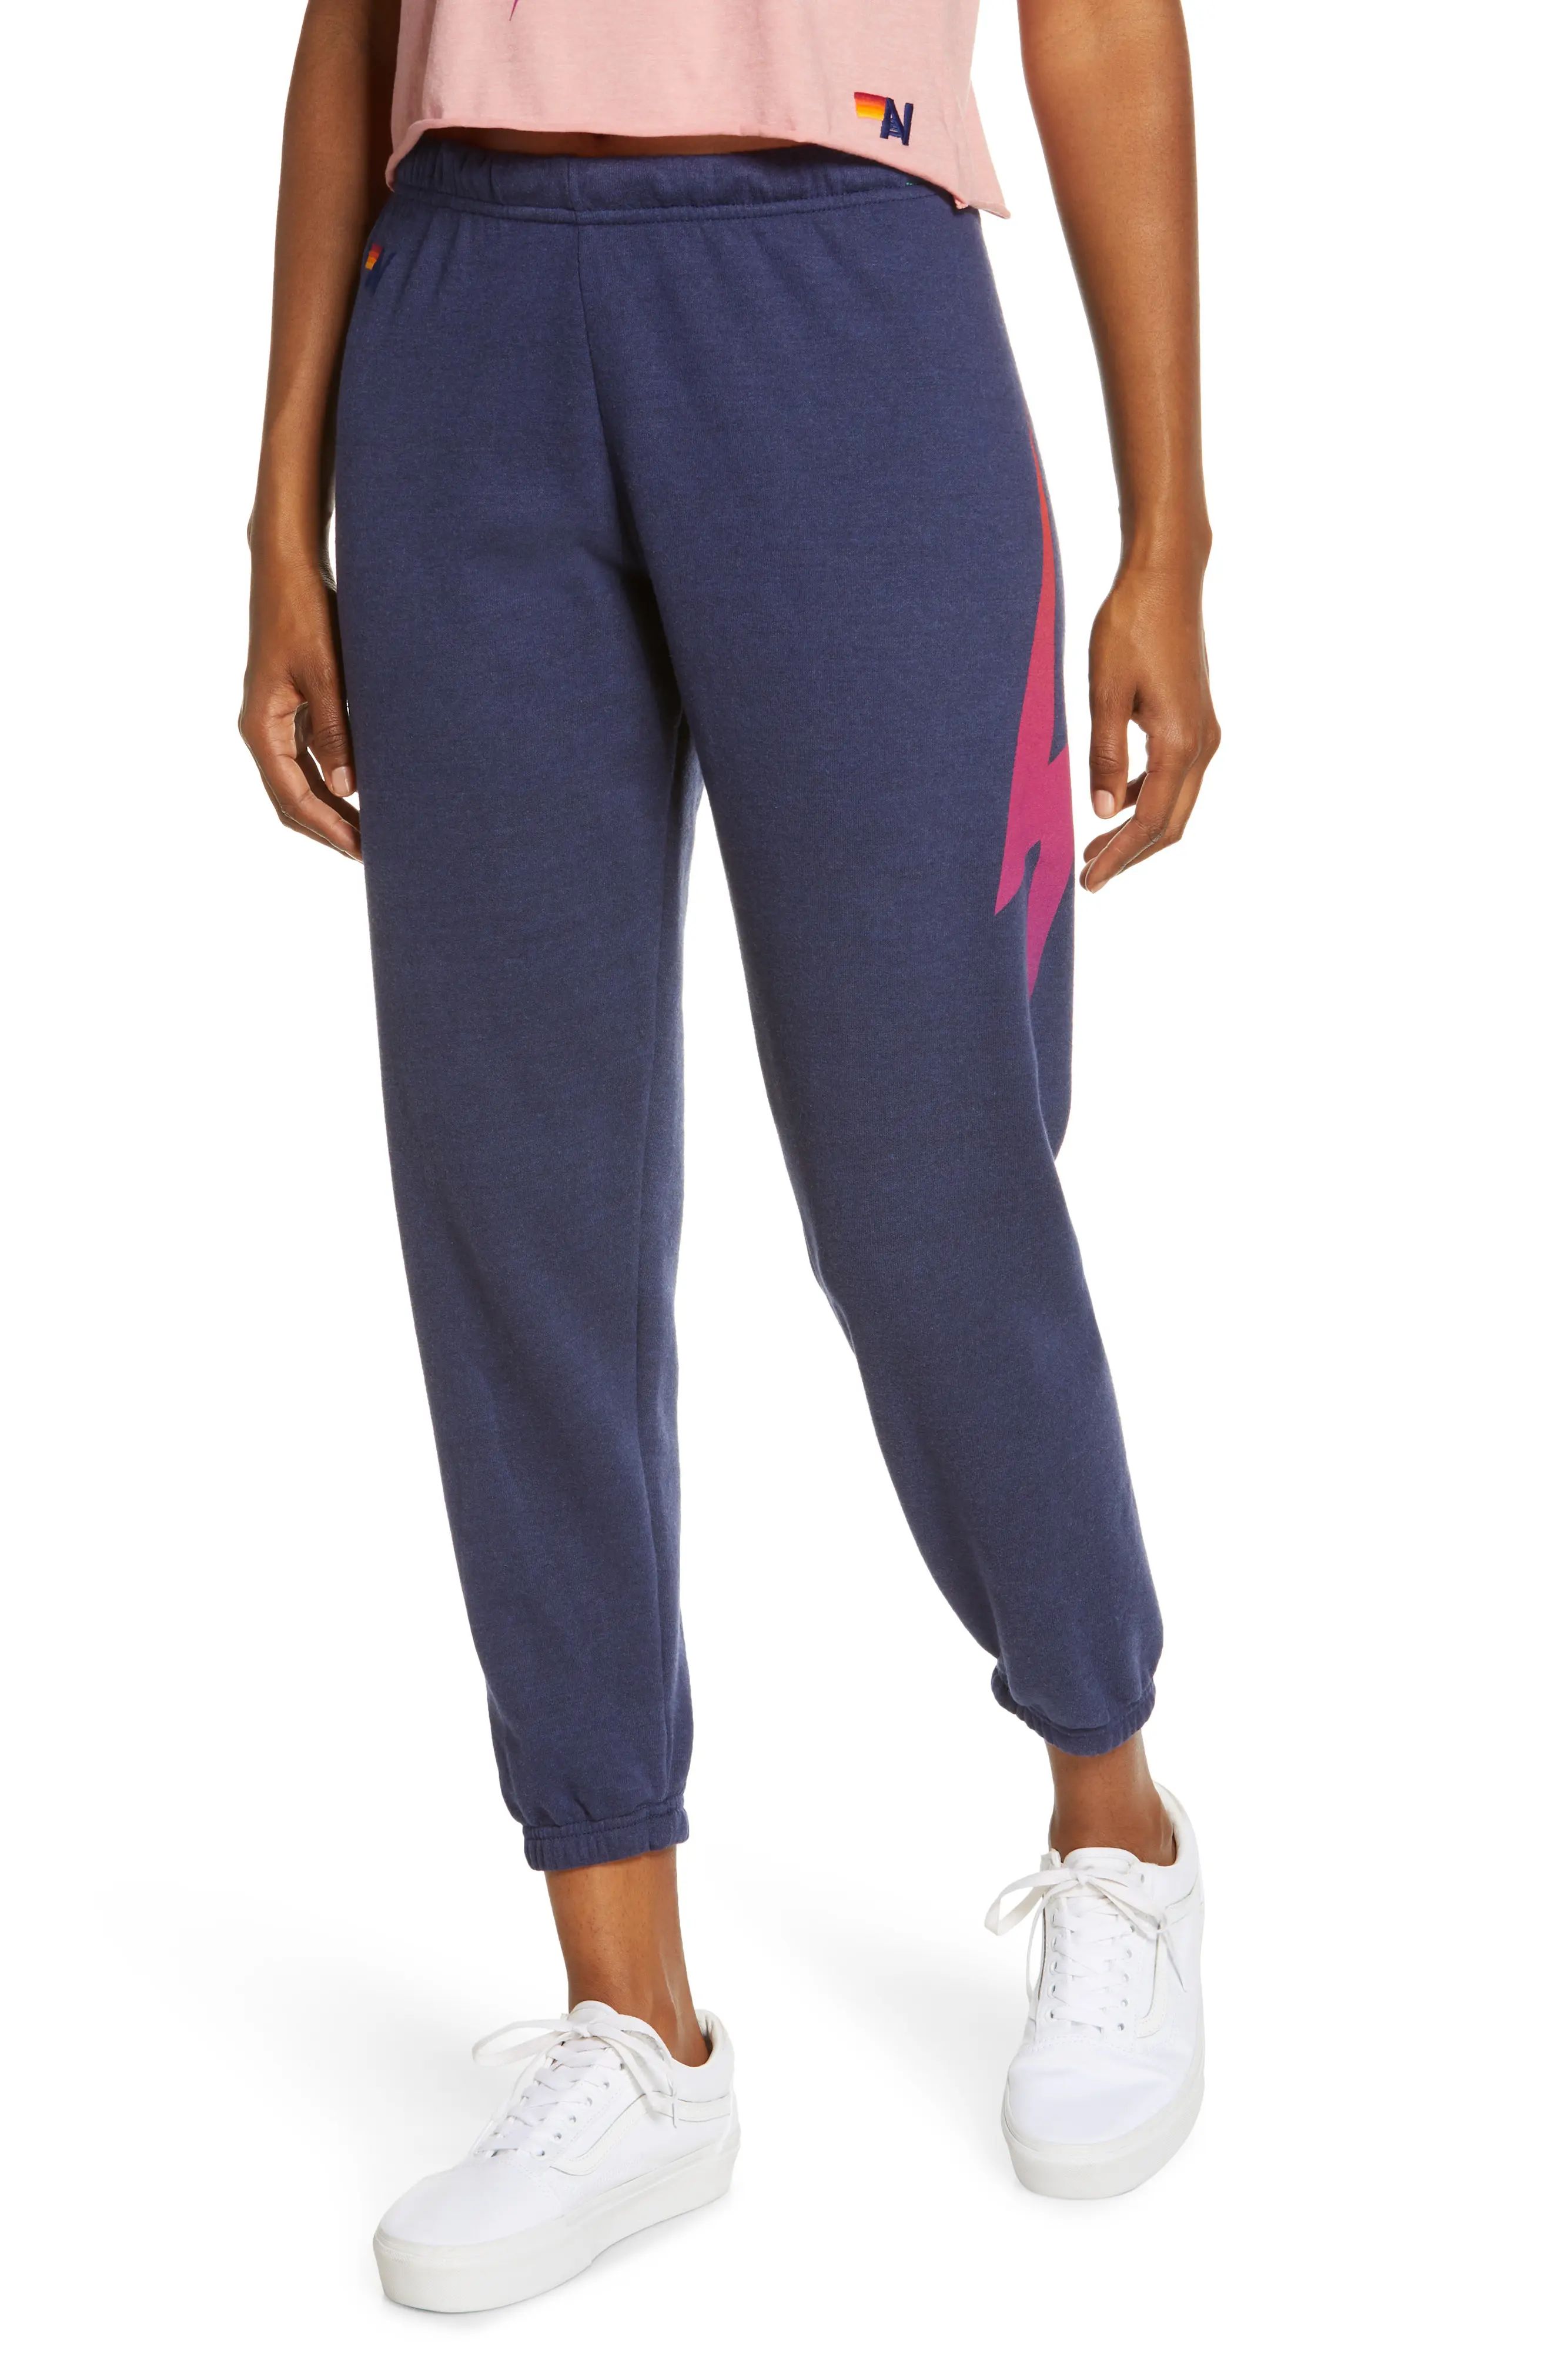 Aviator Nation Bolt Fade Sweapants, Size X-Large in Navy/Pink Purple at Nordstrom | Nordstrom